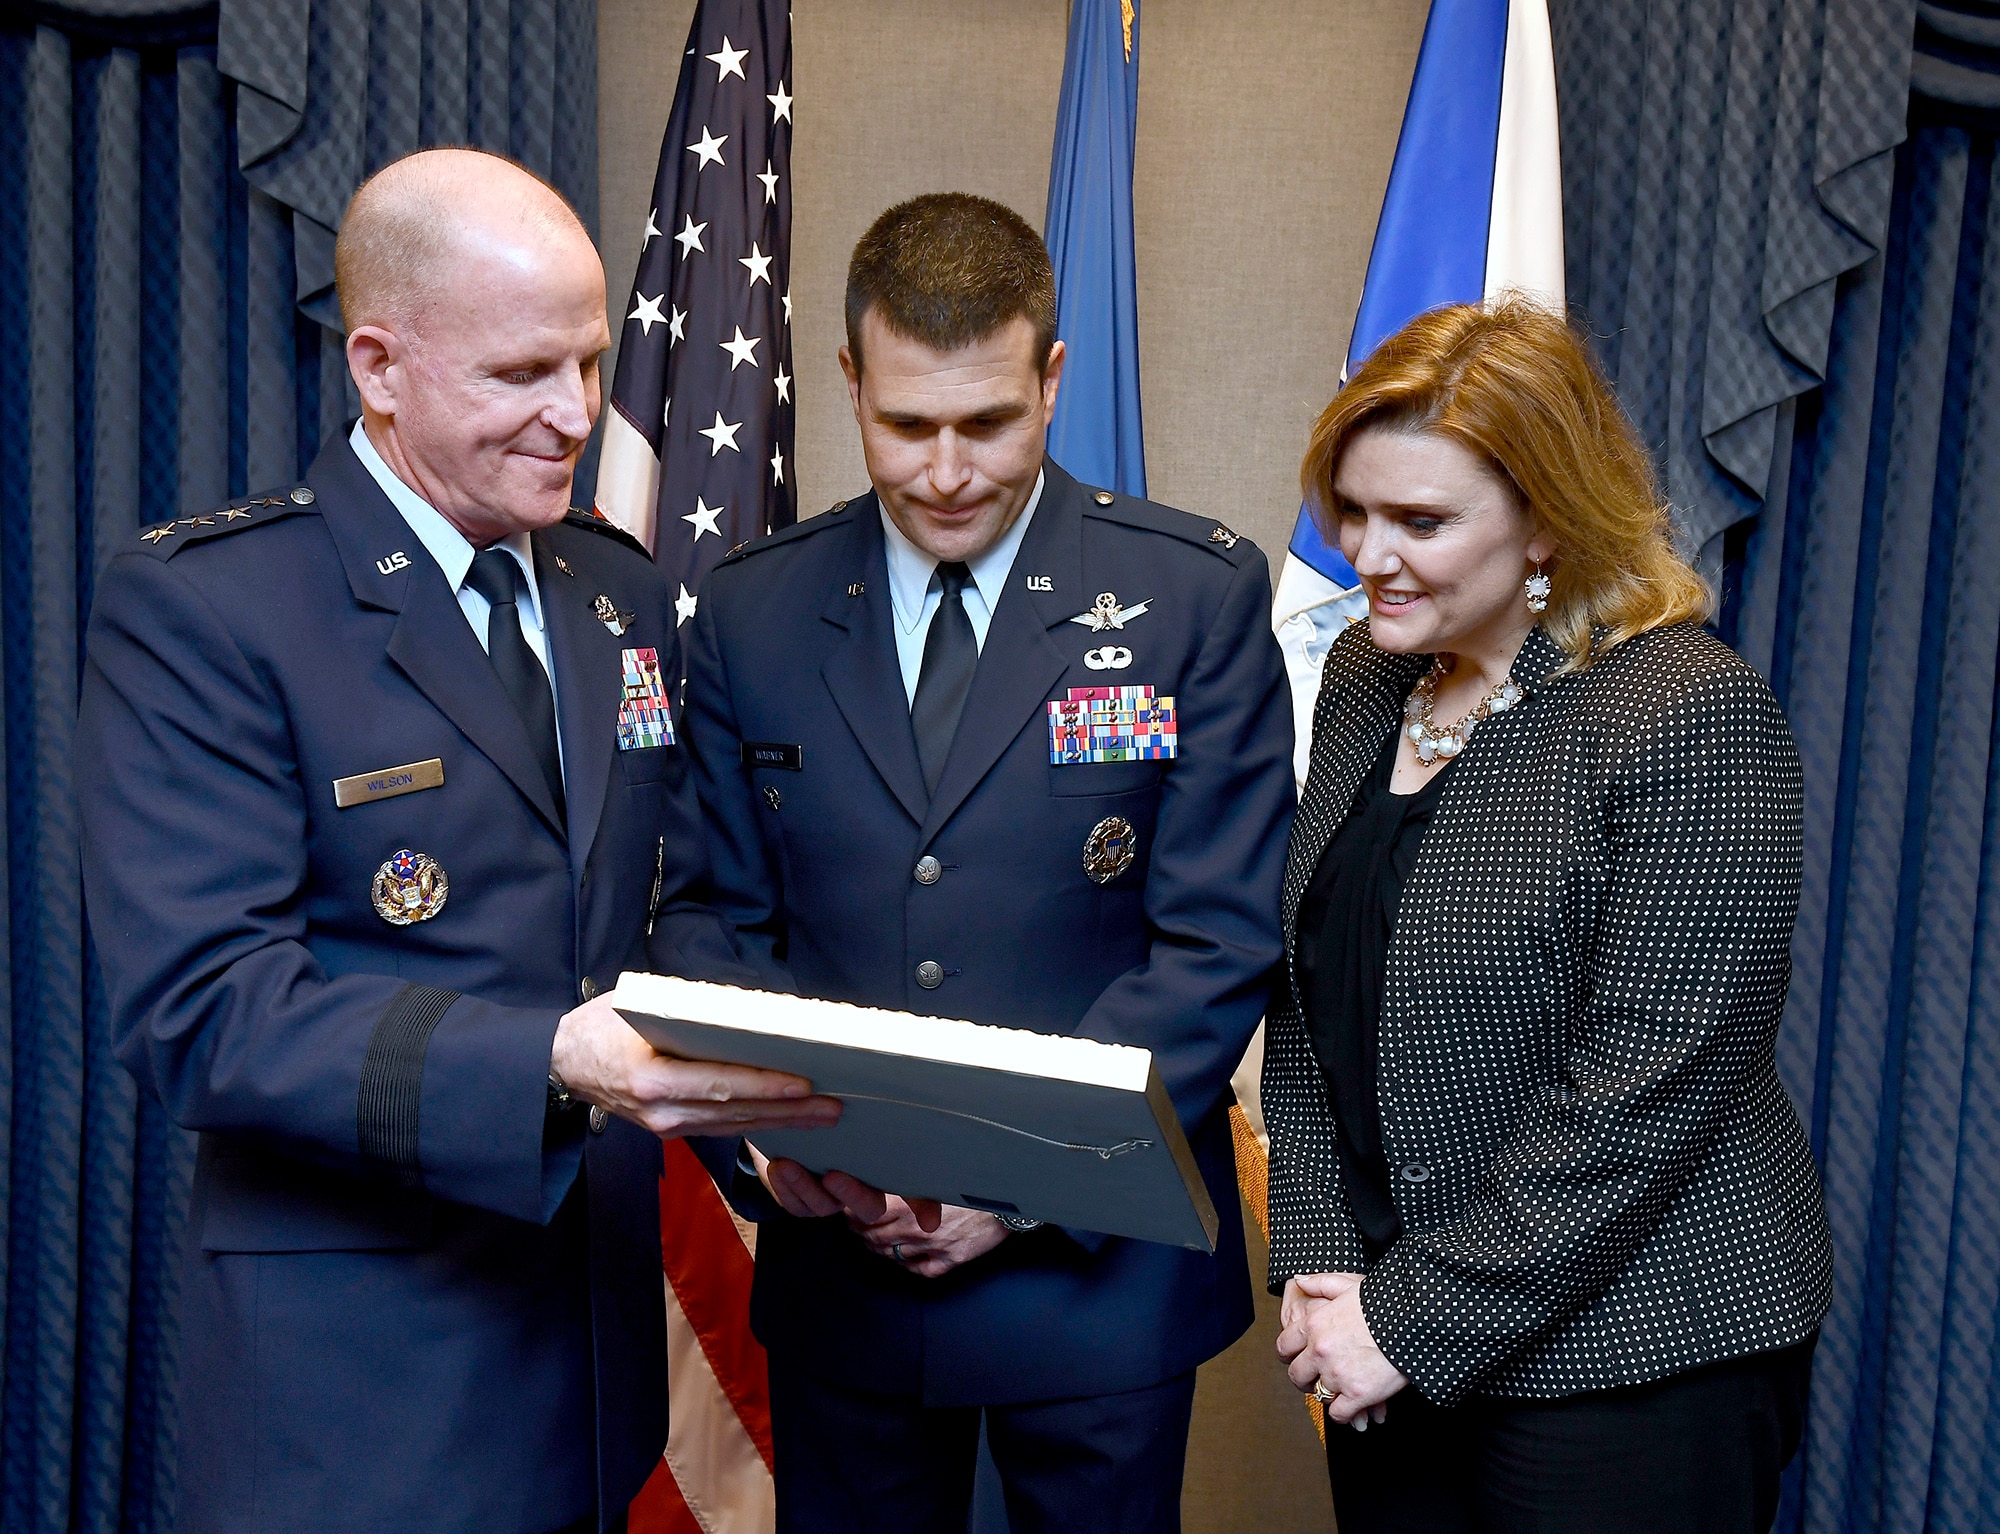 Gen. Stephen Wilson, the Air Force Vice Chief of Staff, presents the 2016 O'Malley Award to Col. John Wagner and his wife, Jennifer, during a Pentagon ceremony, March 7, 2017. The Wagners earned the award for their work at Buckley Air Force Base. Colo. (U.S. Air Force photo/Scott M. Ash)